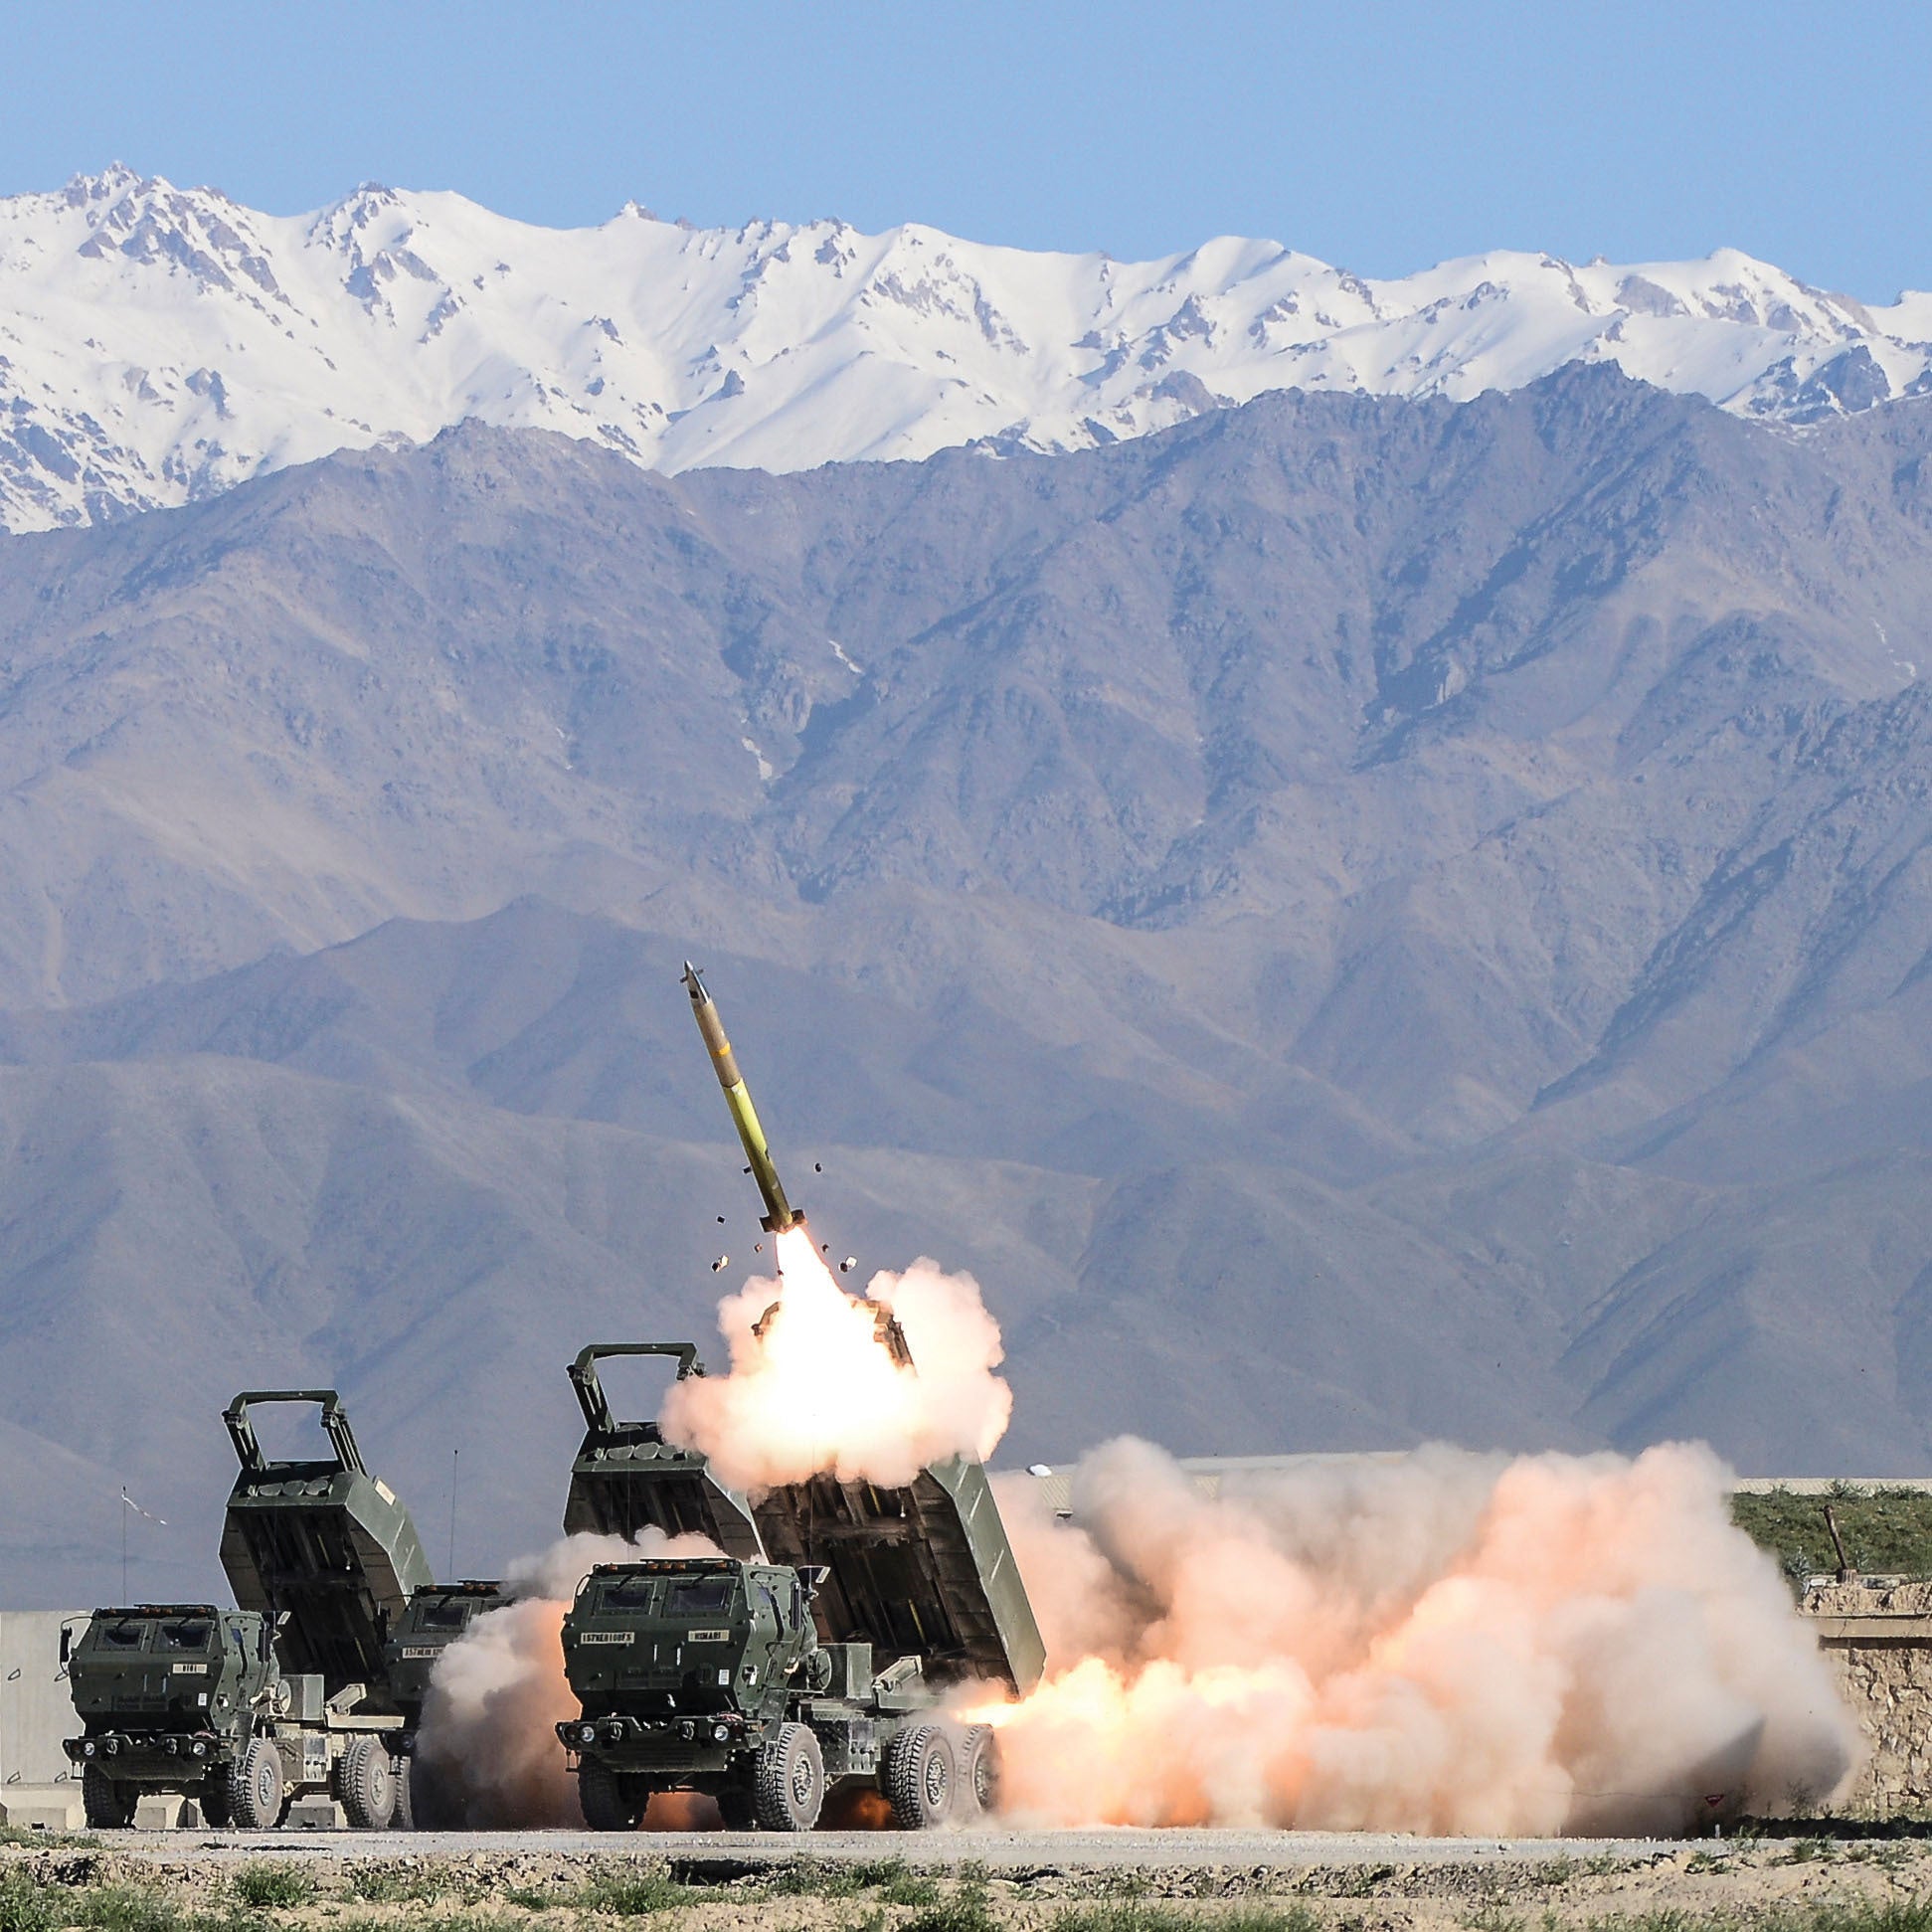 Rocket launches from launcher with mountains in background